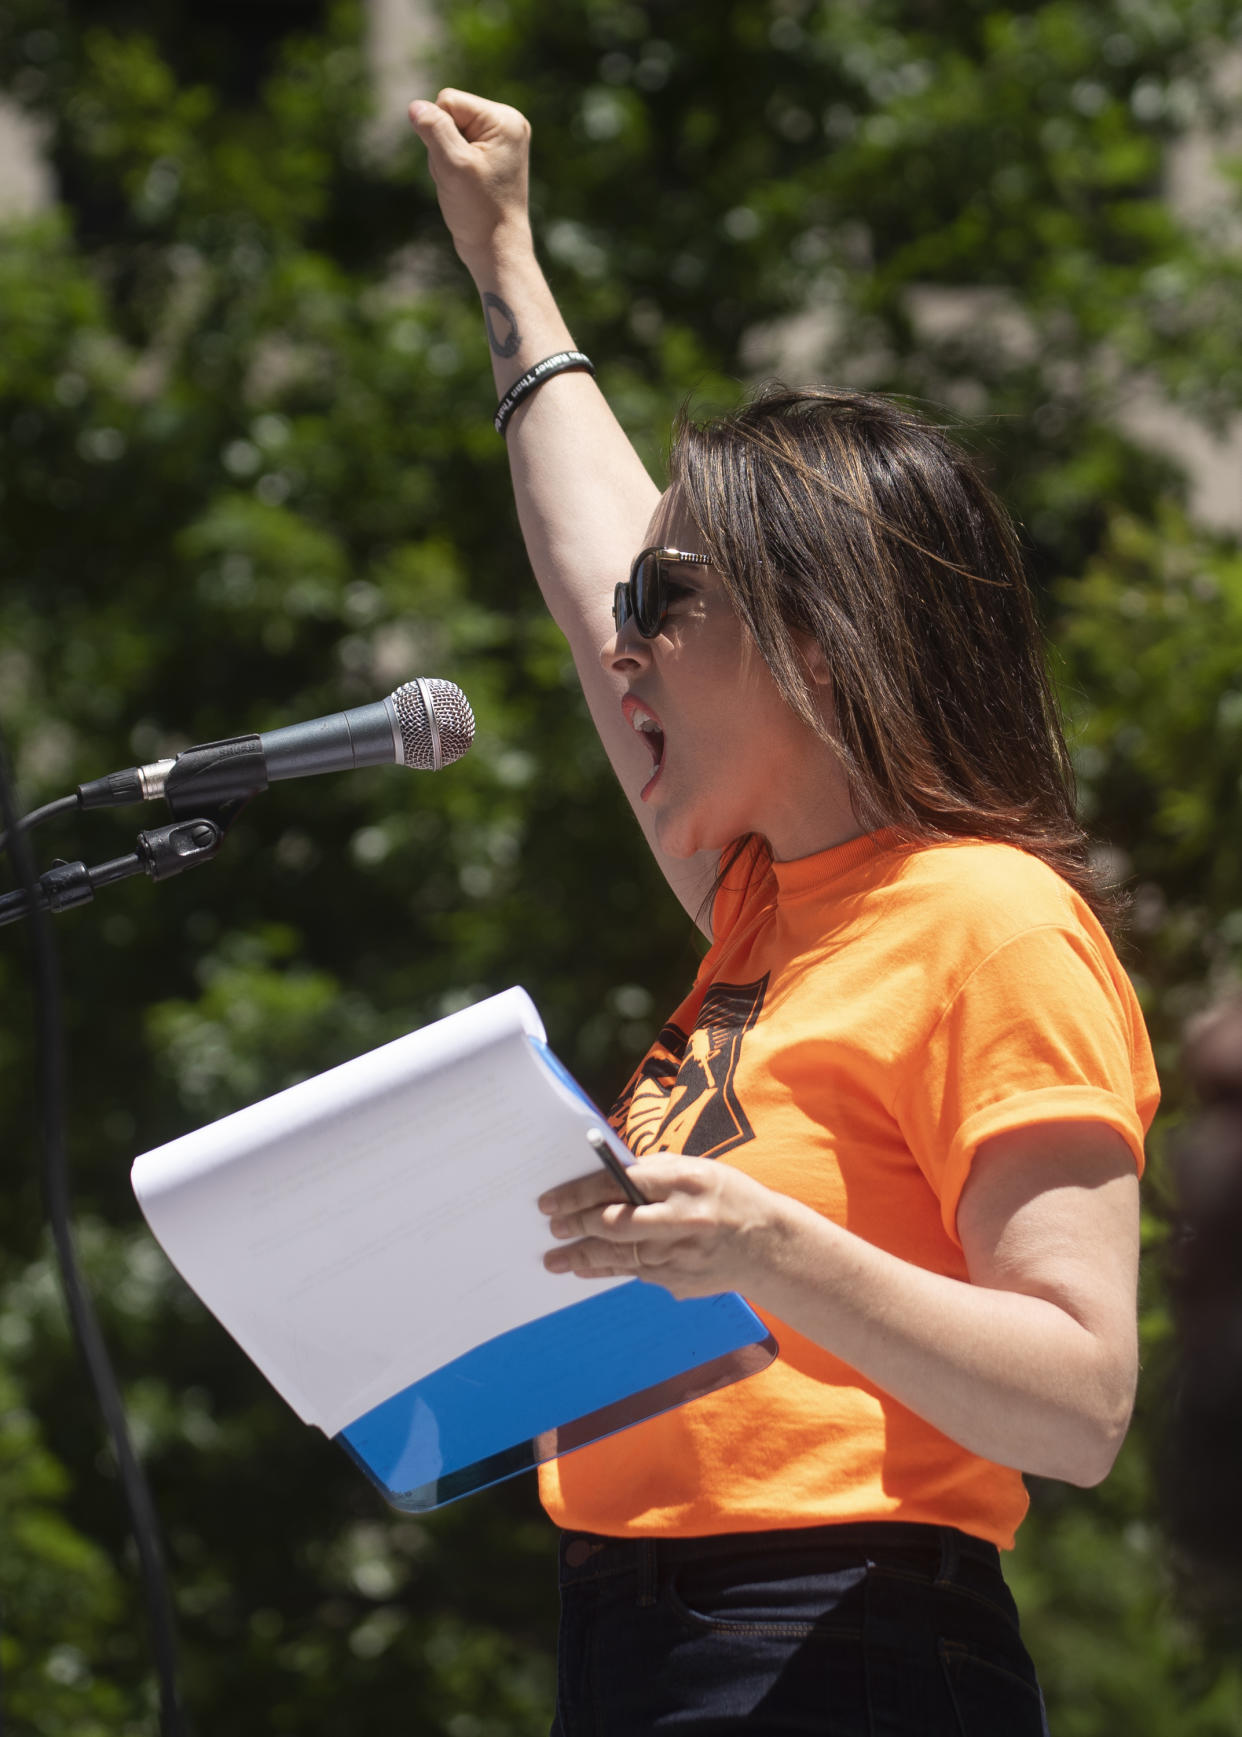 Alyssa Milano, founder of NoRA, reading a list of demands during a protest against the NRA in Dallas on May 5, 2018. (Photo: AP Photo/Rex Curry)